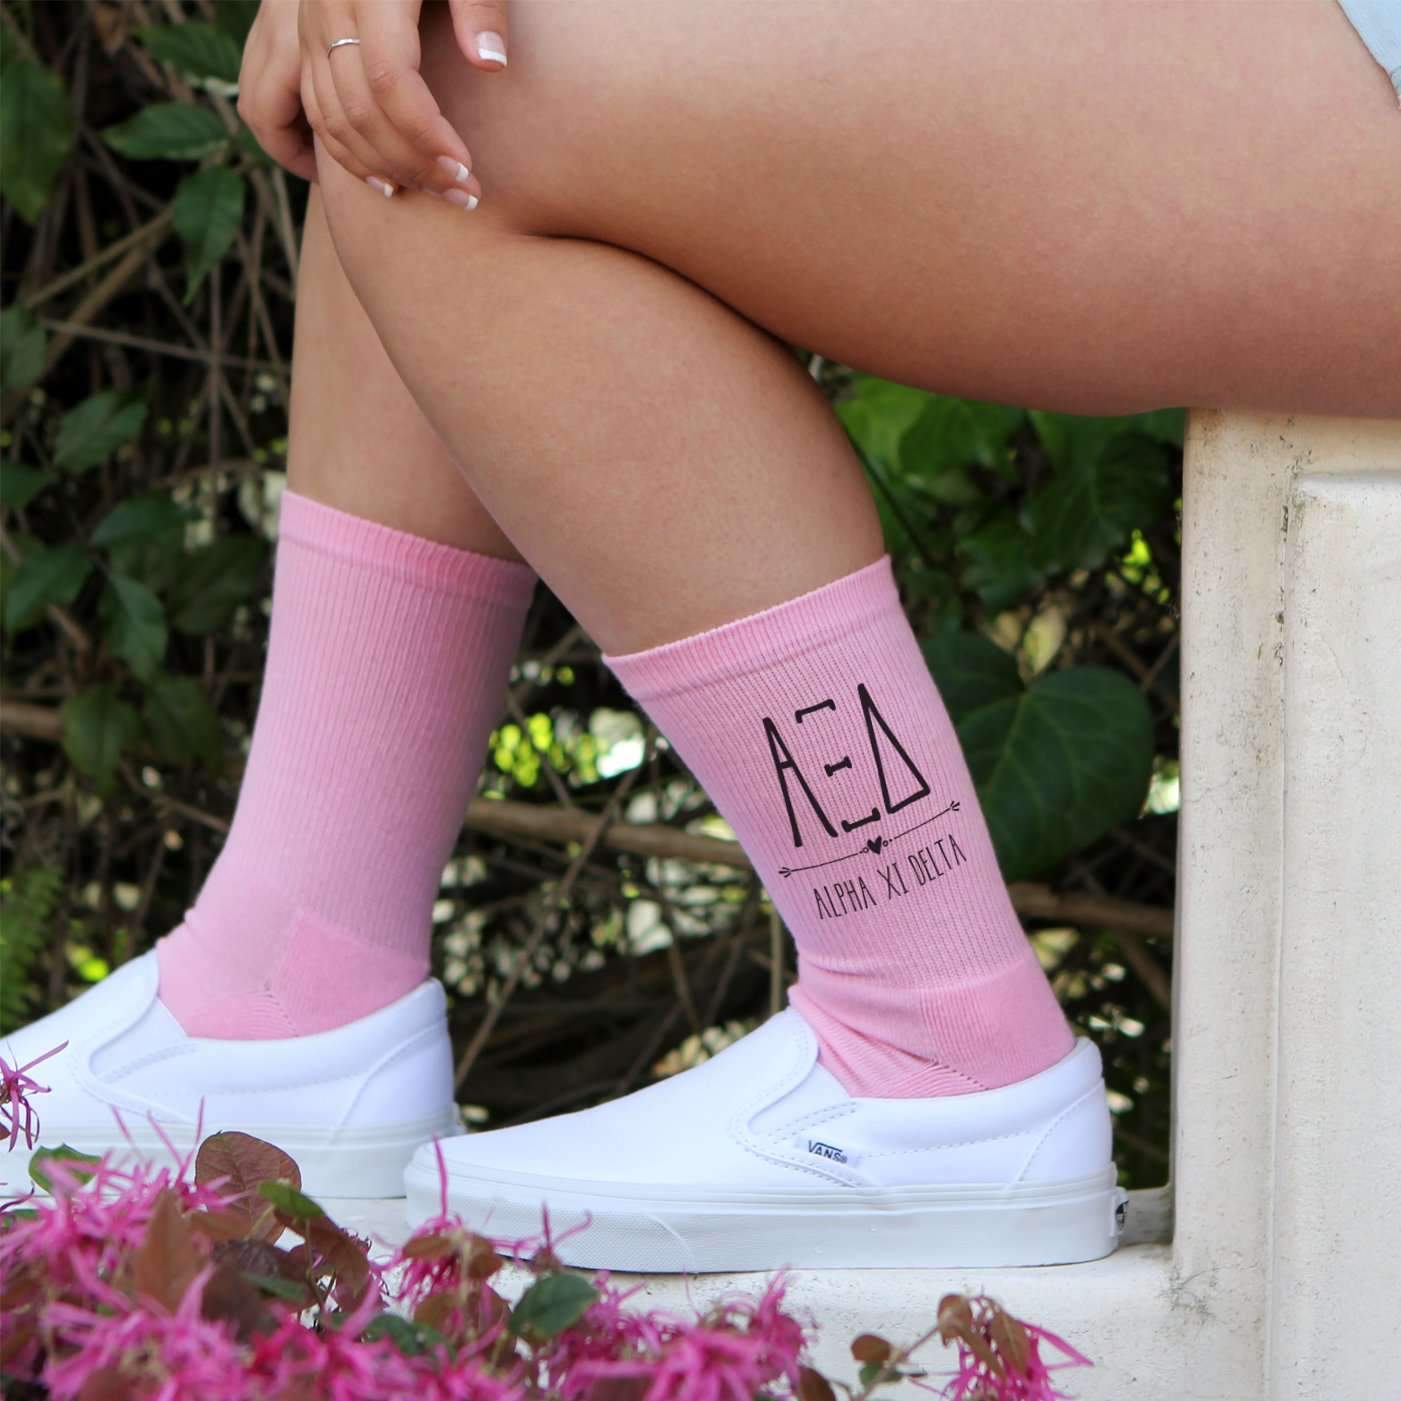 Alpha Xi Delta sorority name and letters custom printed on pink crew socks